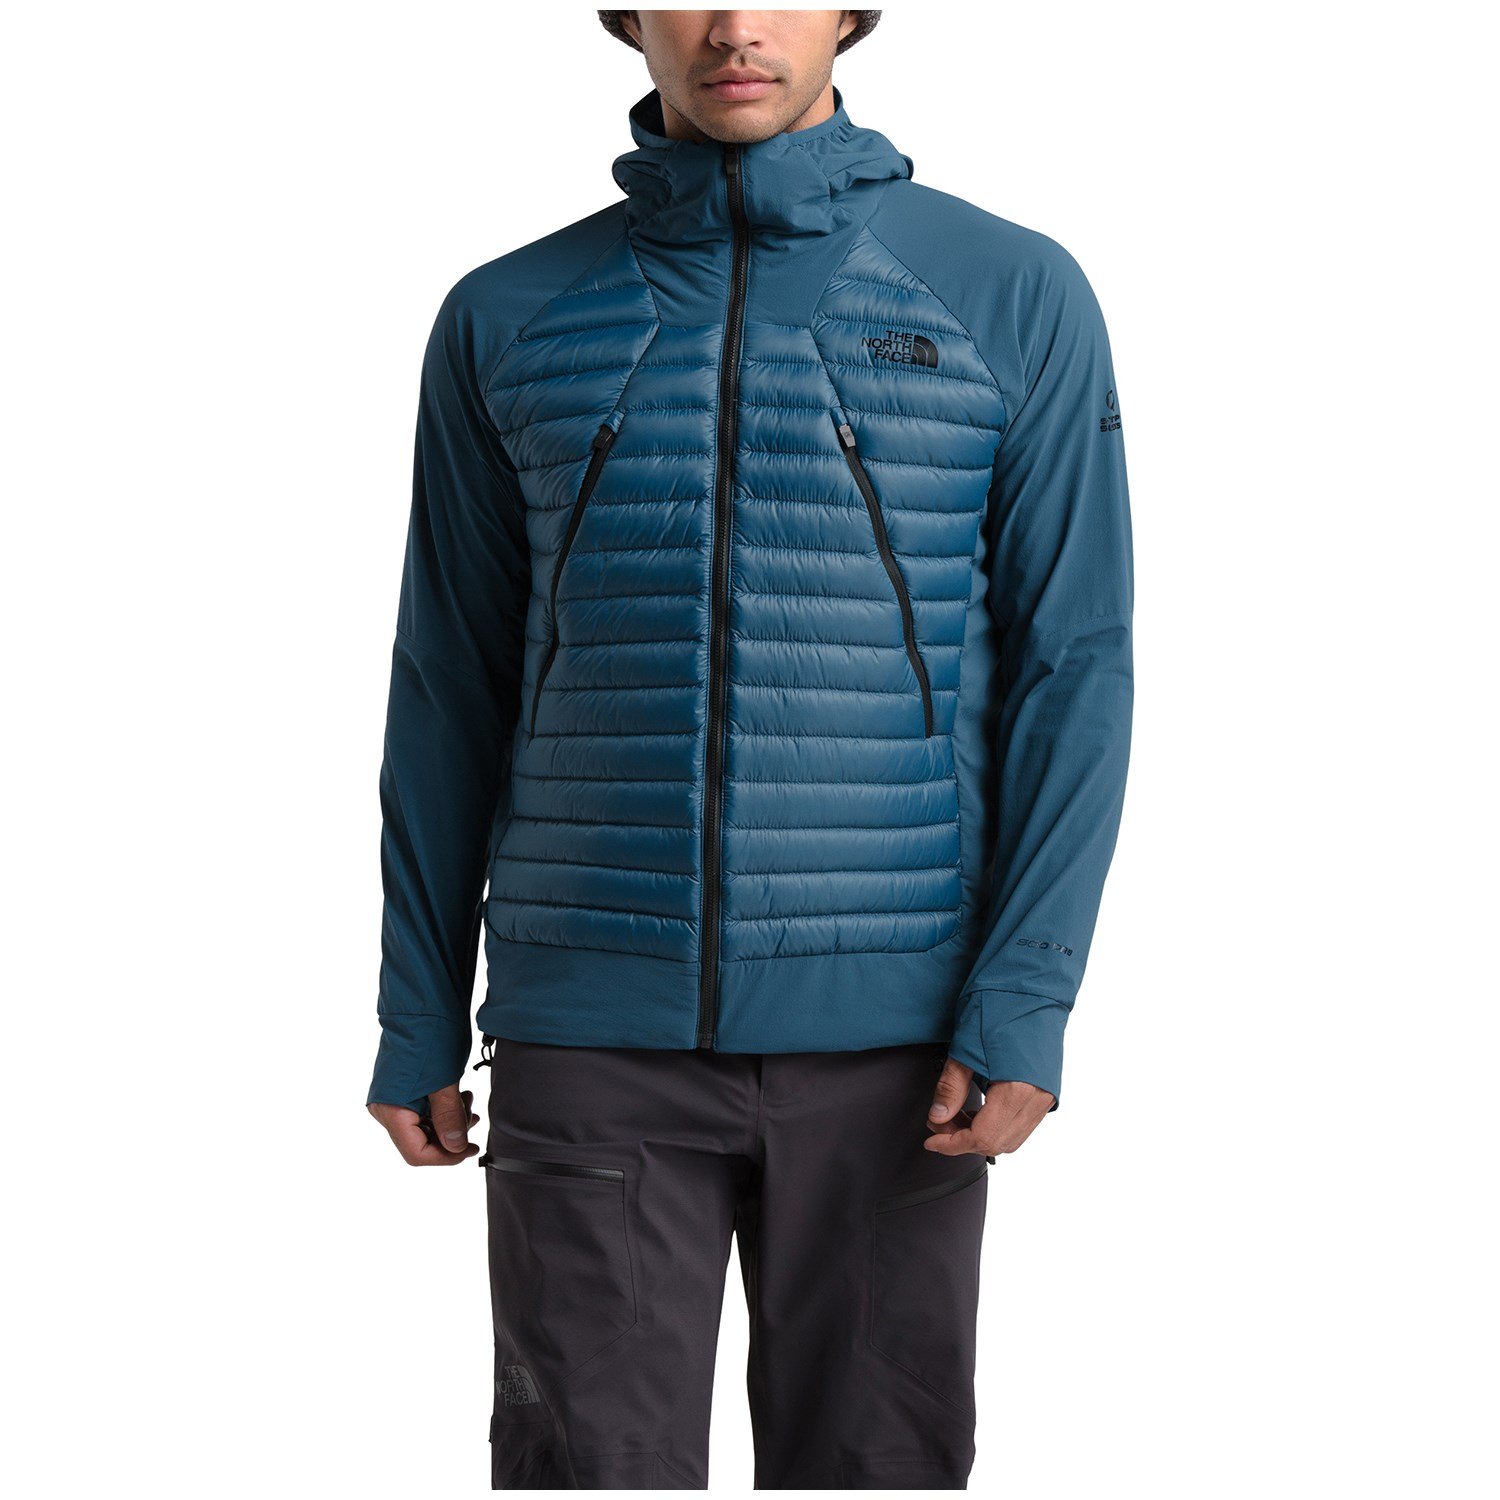 The North Face Unlimited Jacket Evo